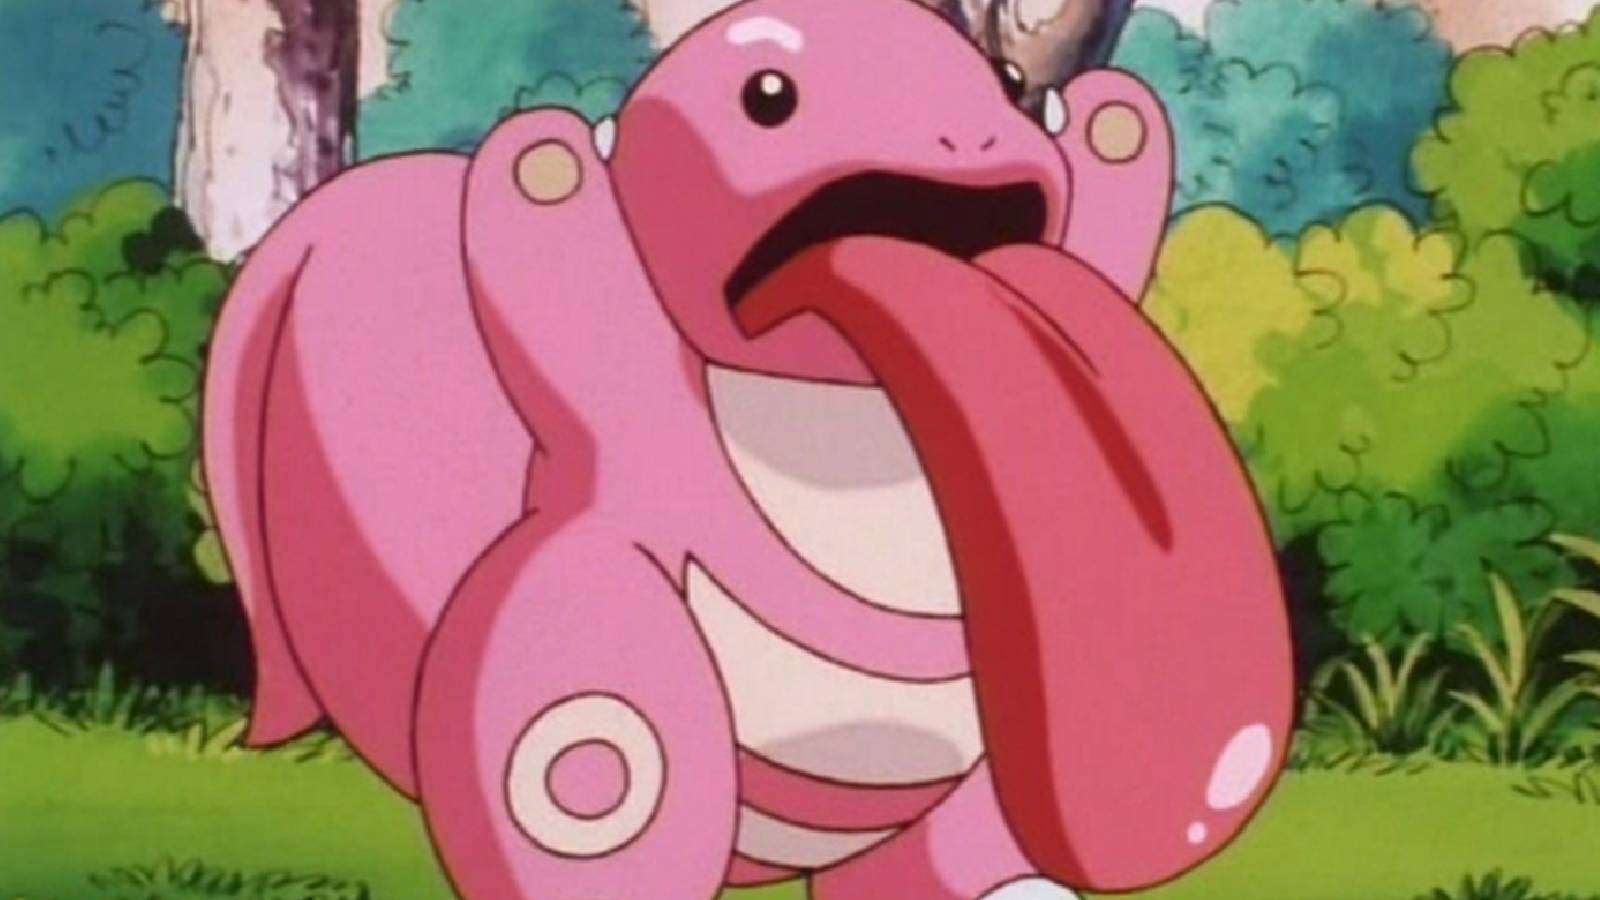 A screenshot from the Pokemon anime shows the norma-type Pokemon Lickitung